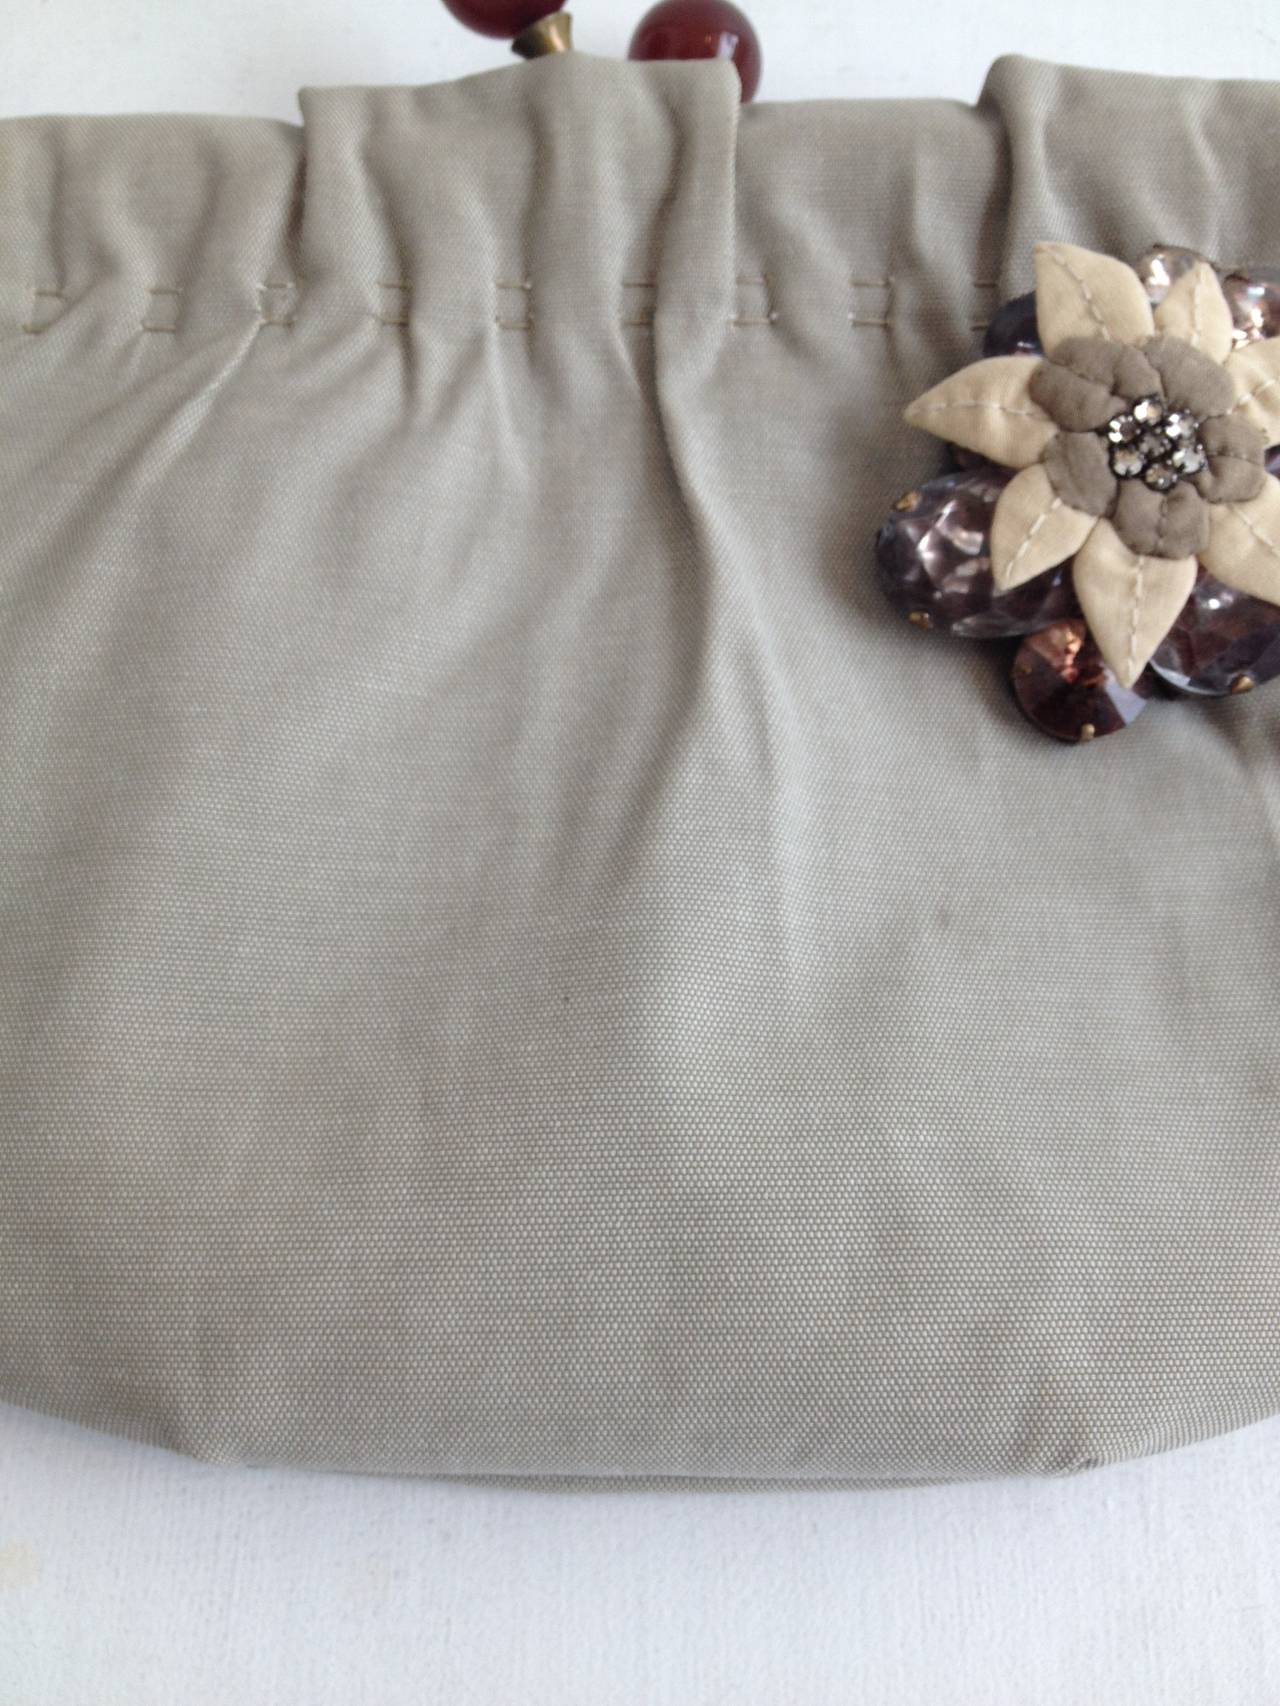 Marni Grey Kisslock Clutch with Floral Brooch In Excellent Condition In San Francisco, CA